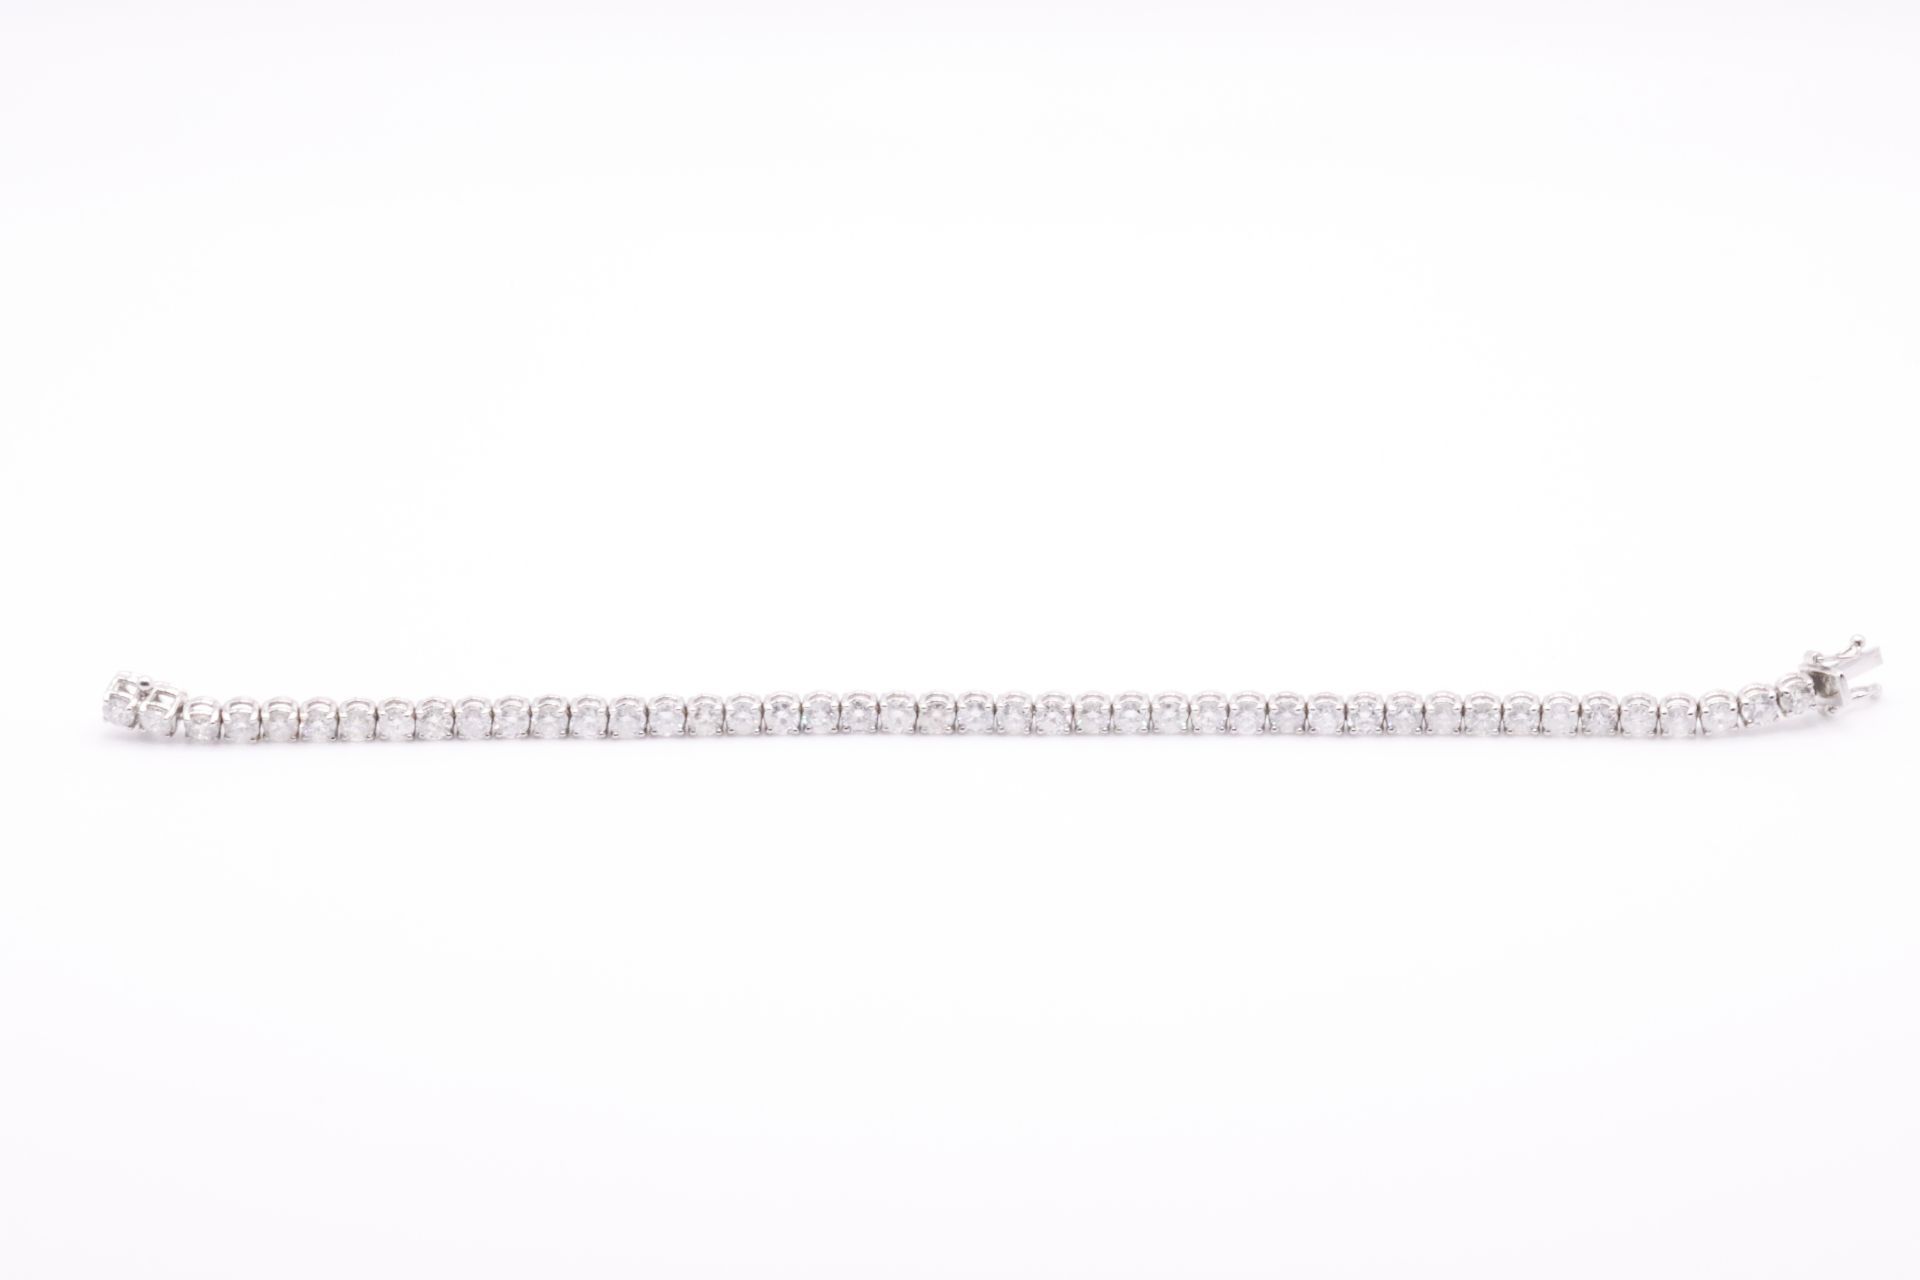 **ON SALE** 'Brand New' 9.0 Carat 18ct White Gold Tennis Bracelet set with Round Brilliant Cut - Image 4 of 7